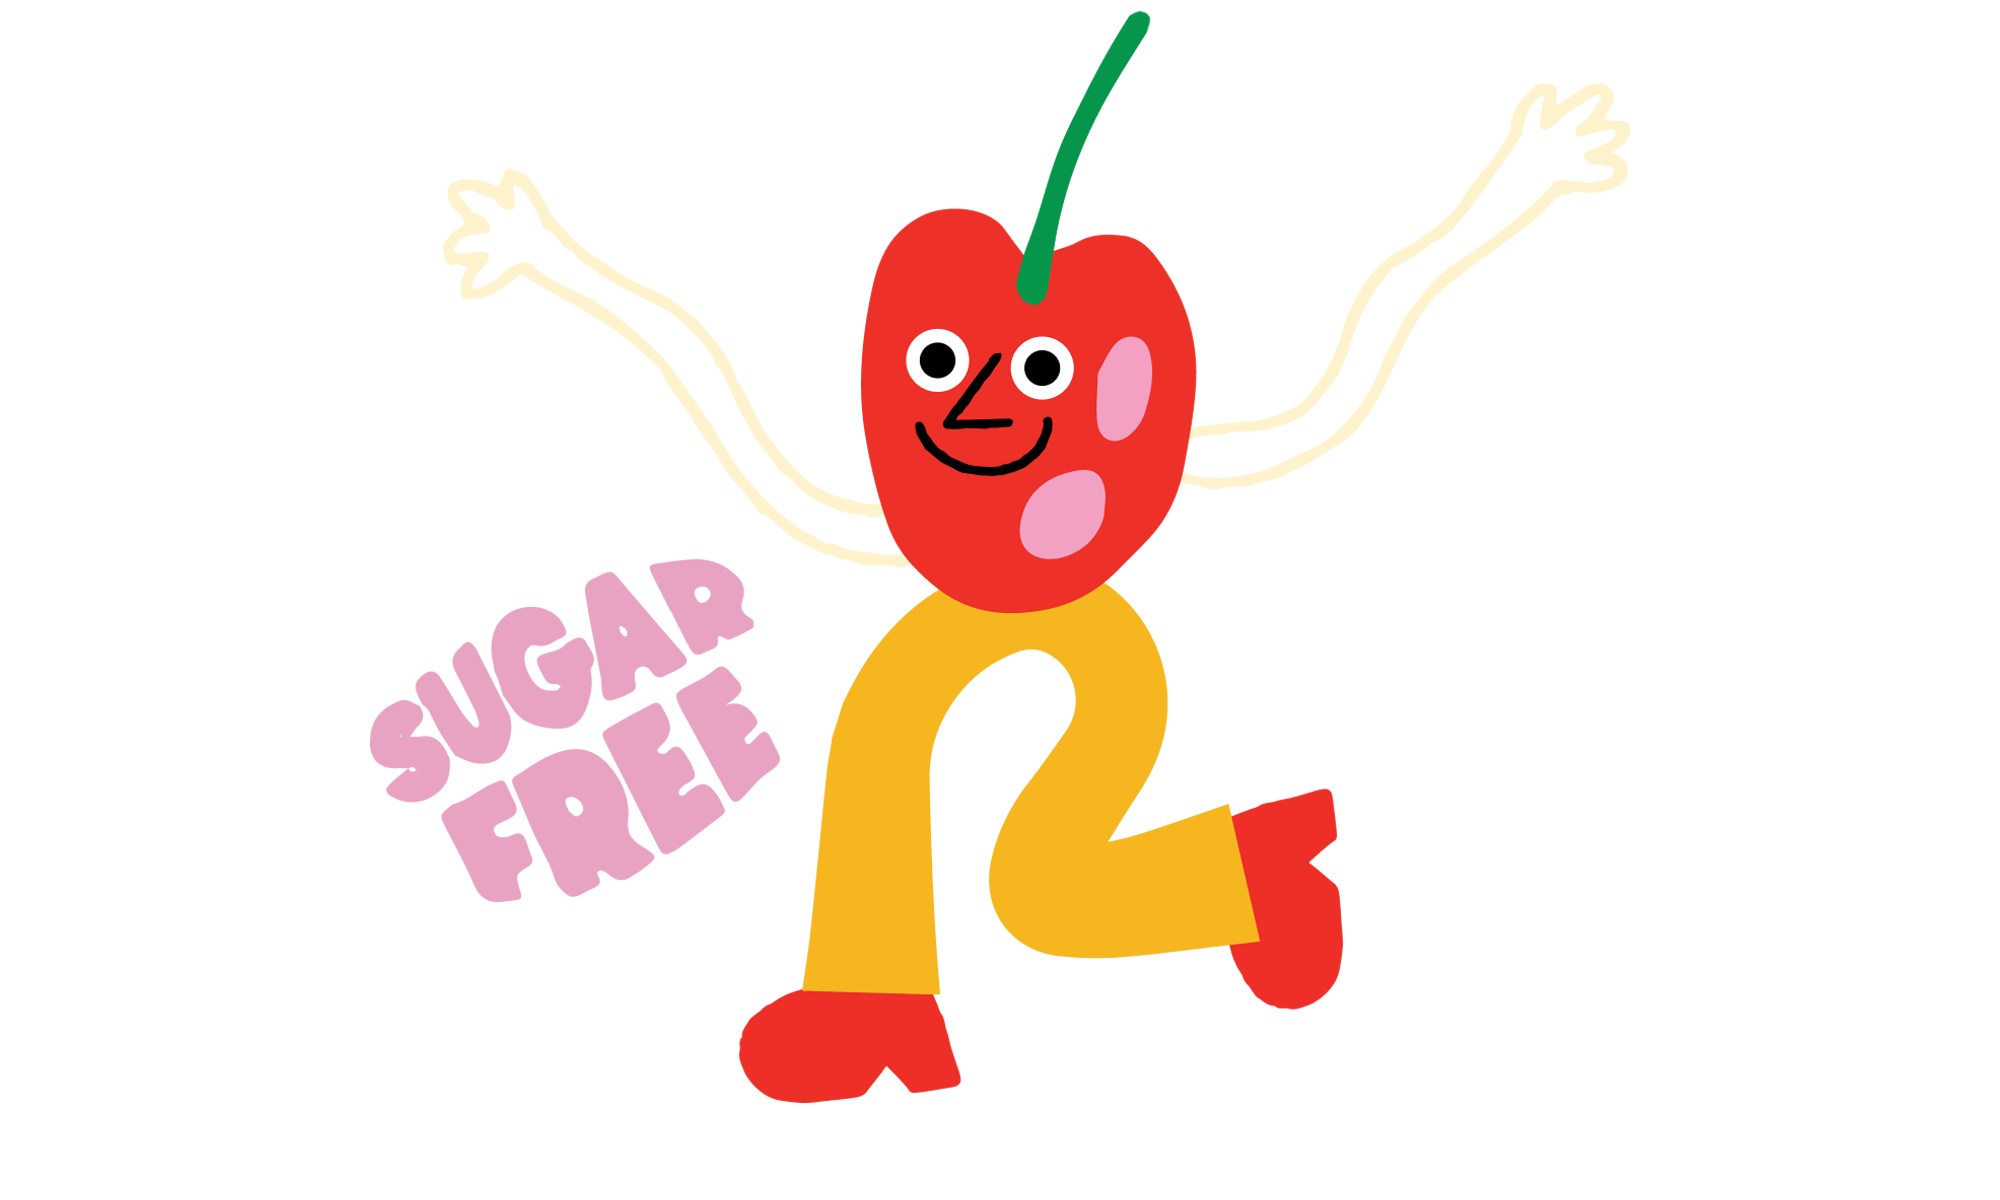 Cute sugar free cherry graphic. Cherry character is waving arms in the air, smiling at the camera, and has its right foot kicked back.